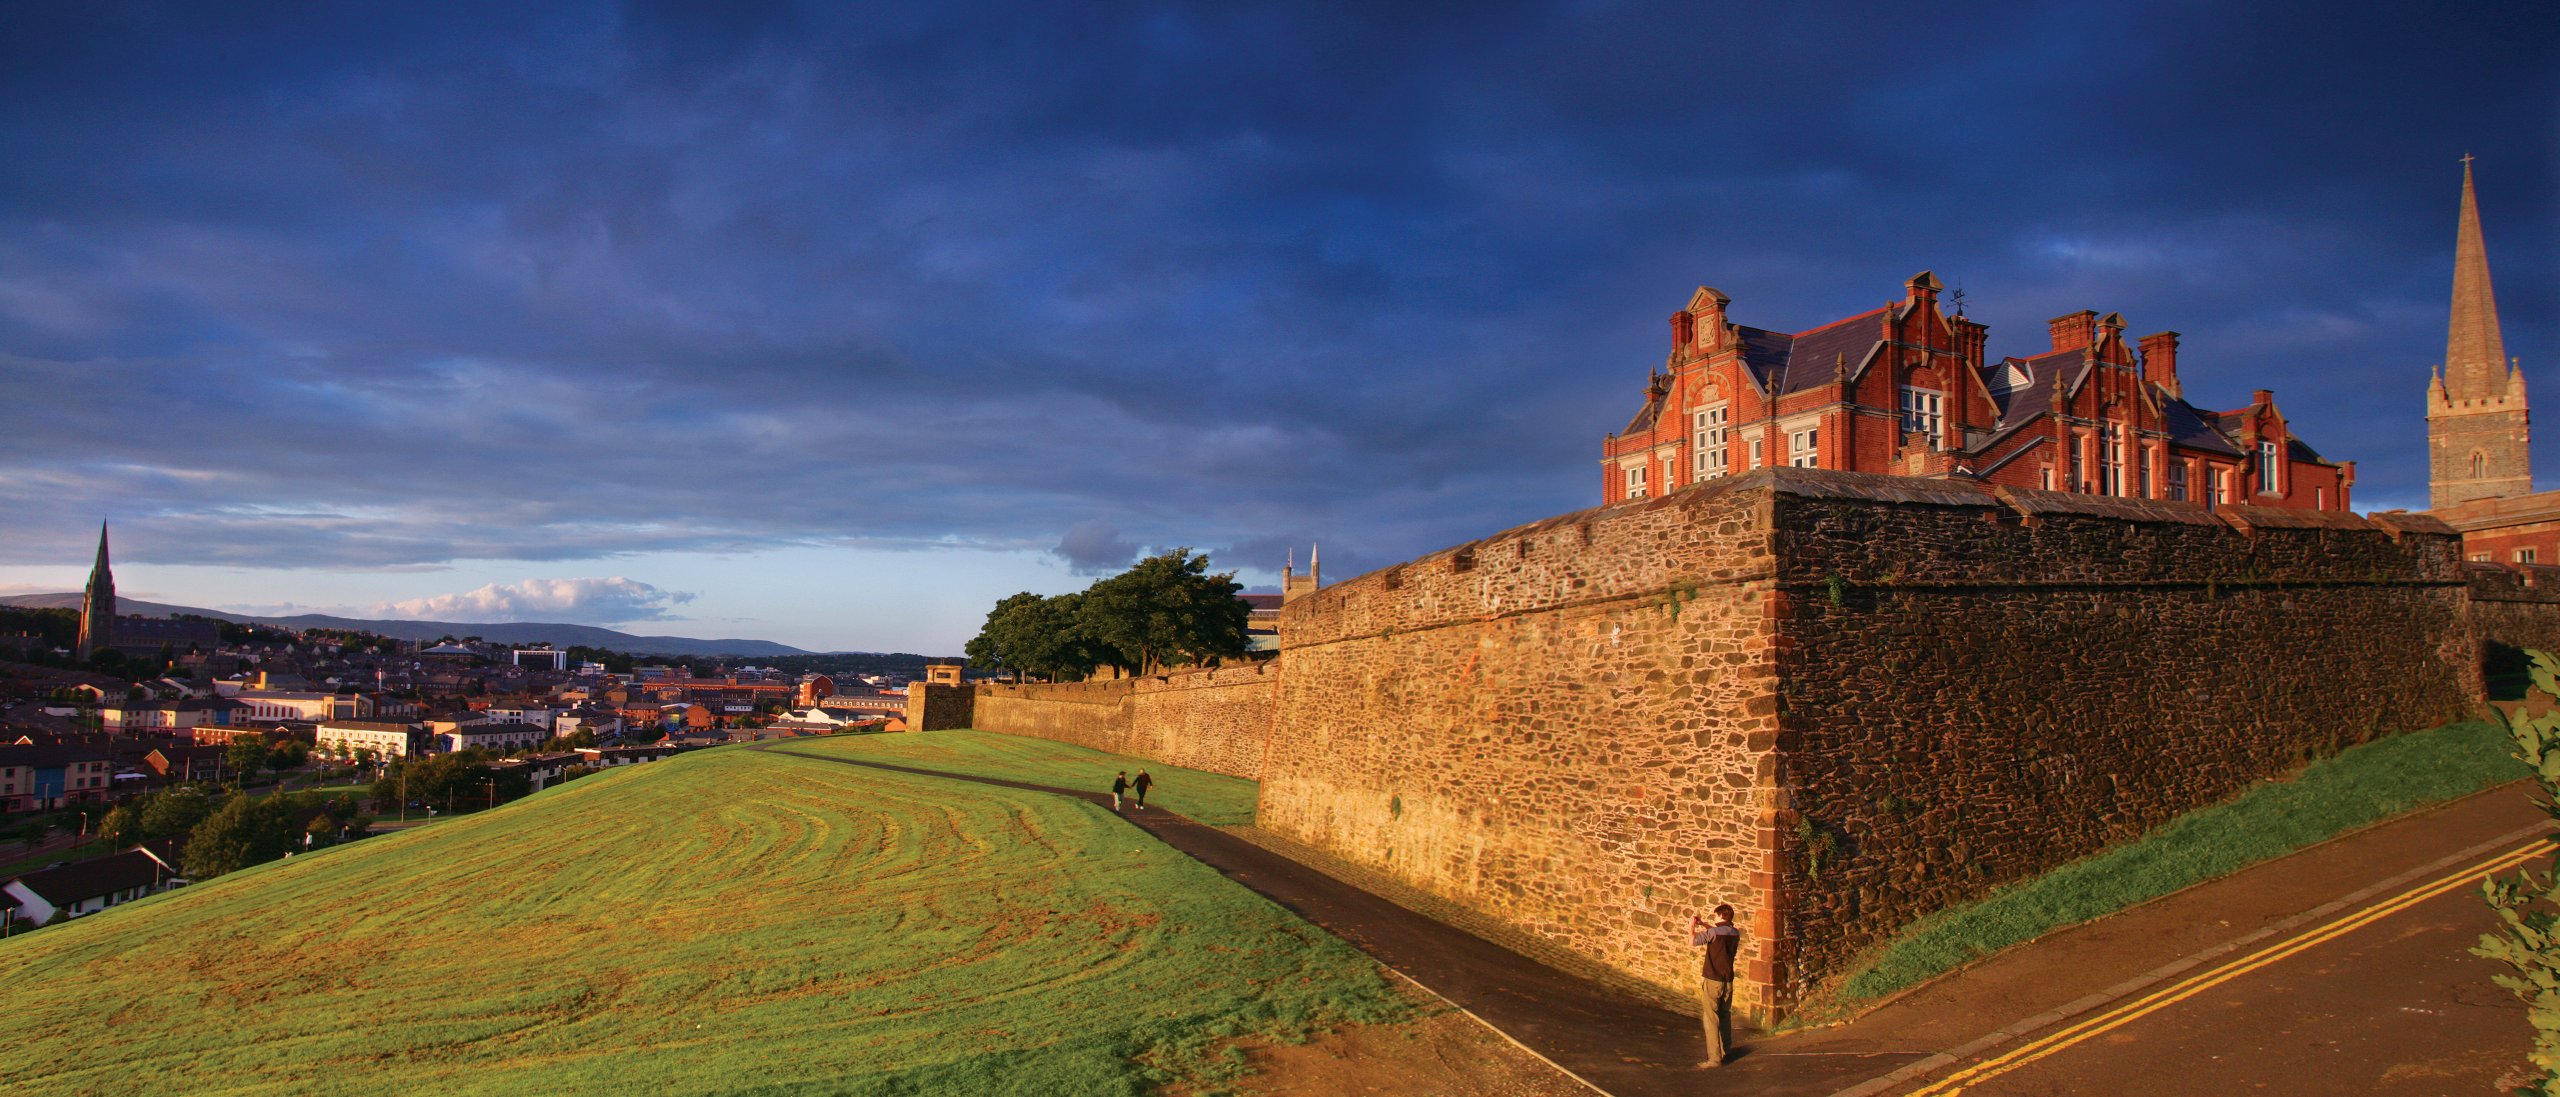 Sunlight catches the 17th century walls of Derry, Ireland's only walled city